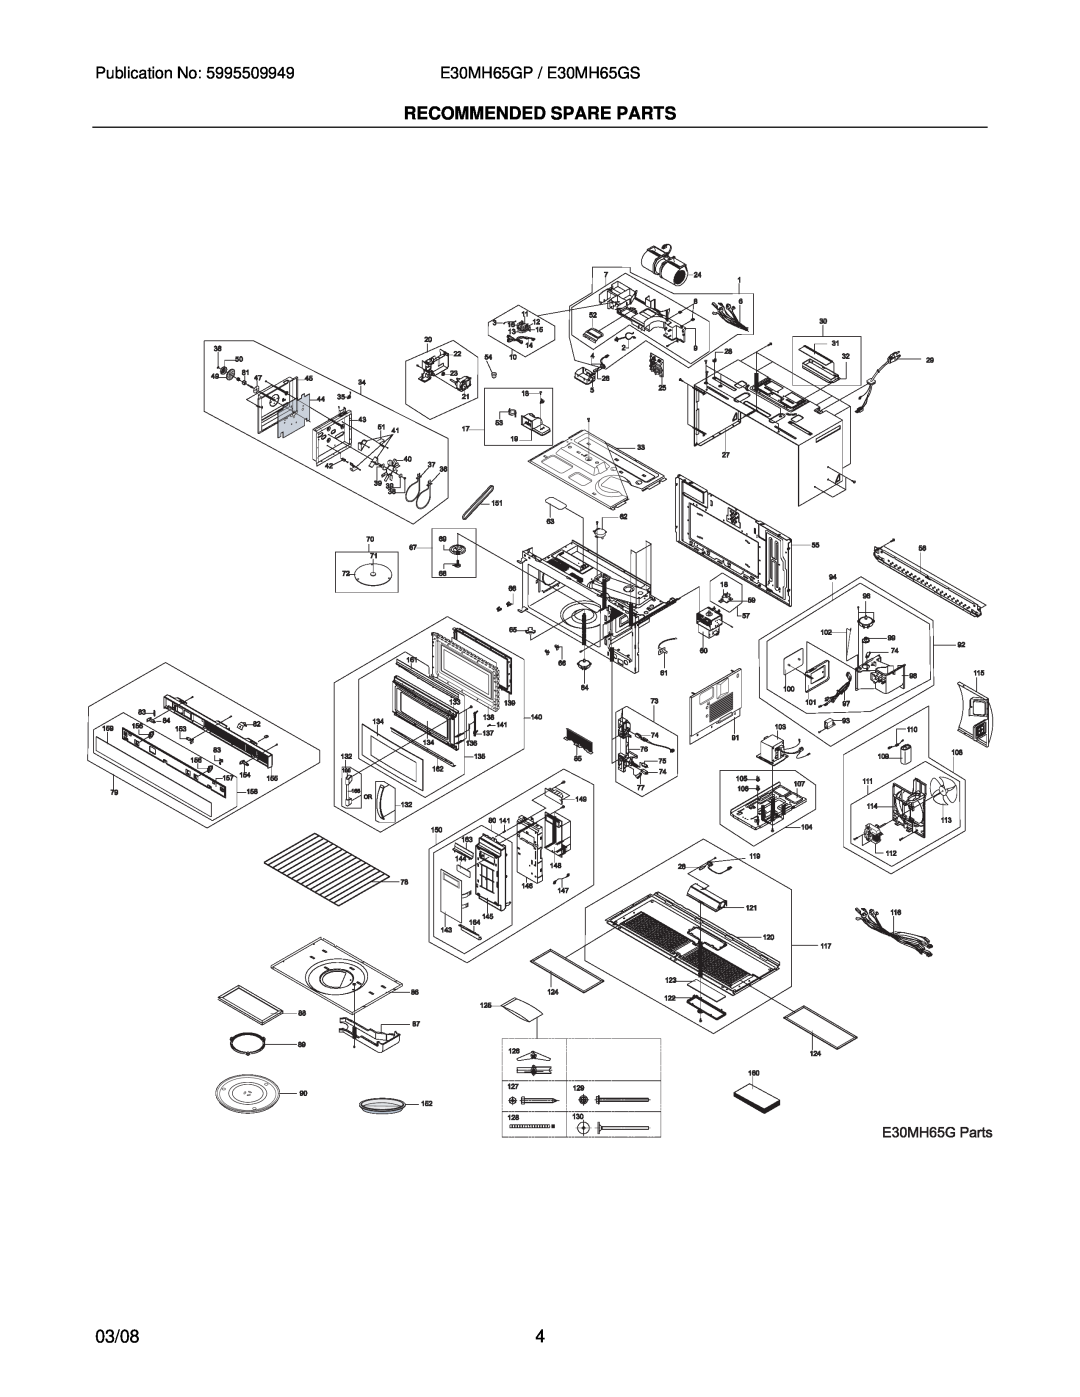 Electrolux E30MH65GSSA, E30MH65GPSA installation instructions Recommended Spare Parts, 03/08 